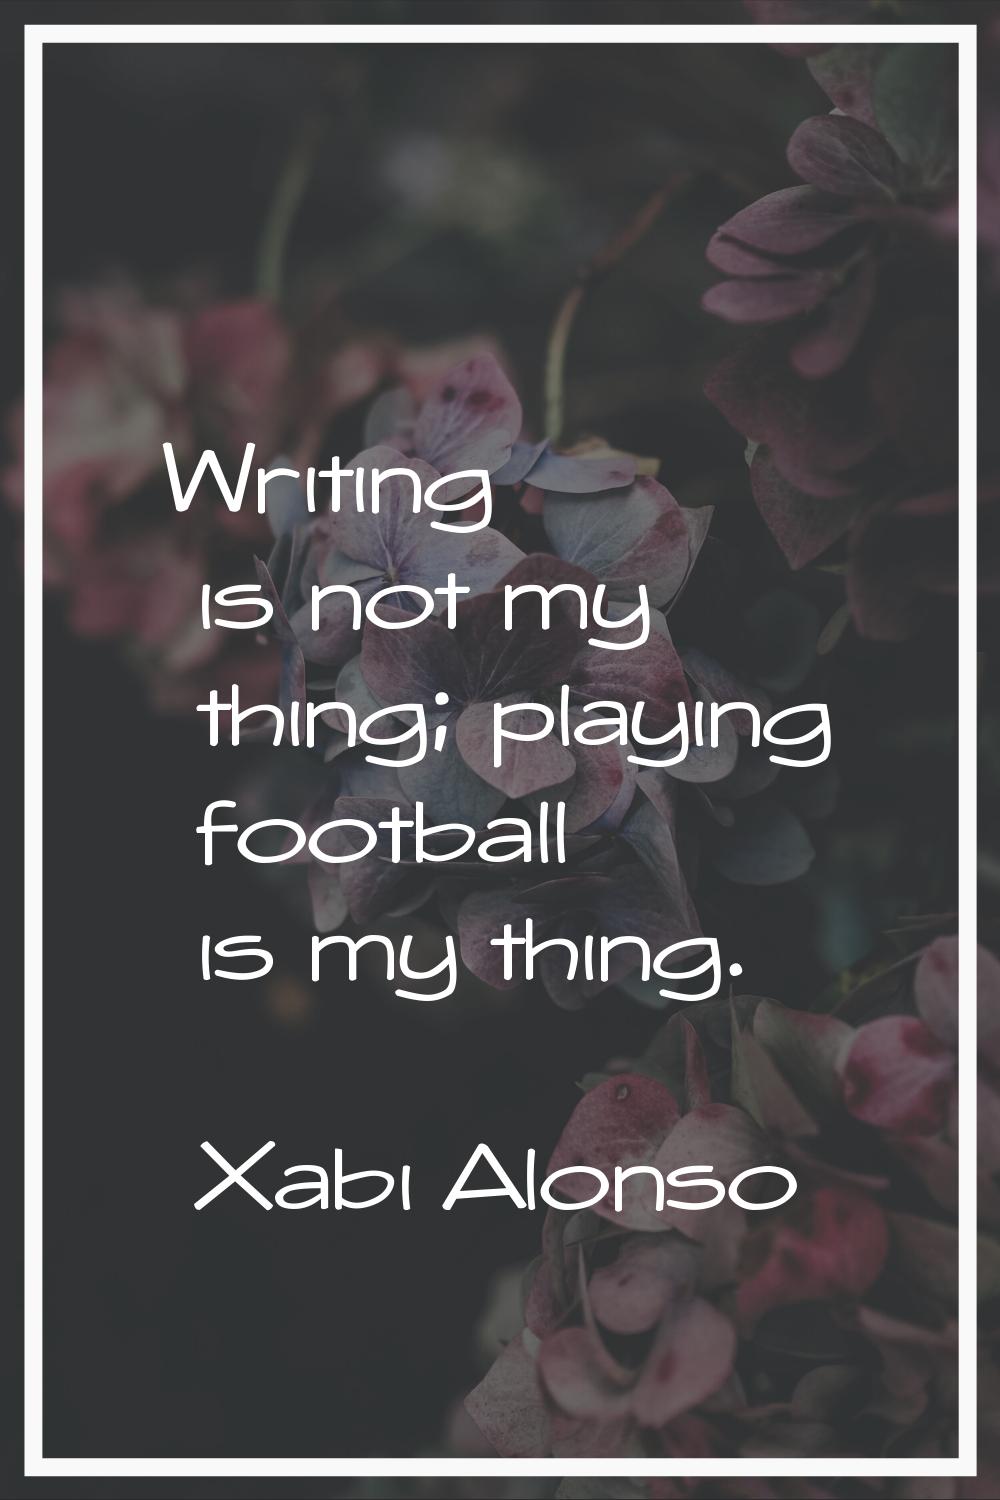 Writing is not my thing; playing football is my thing.